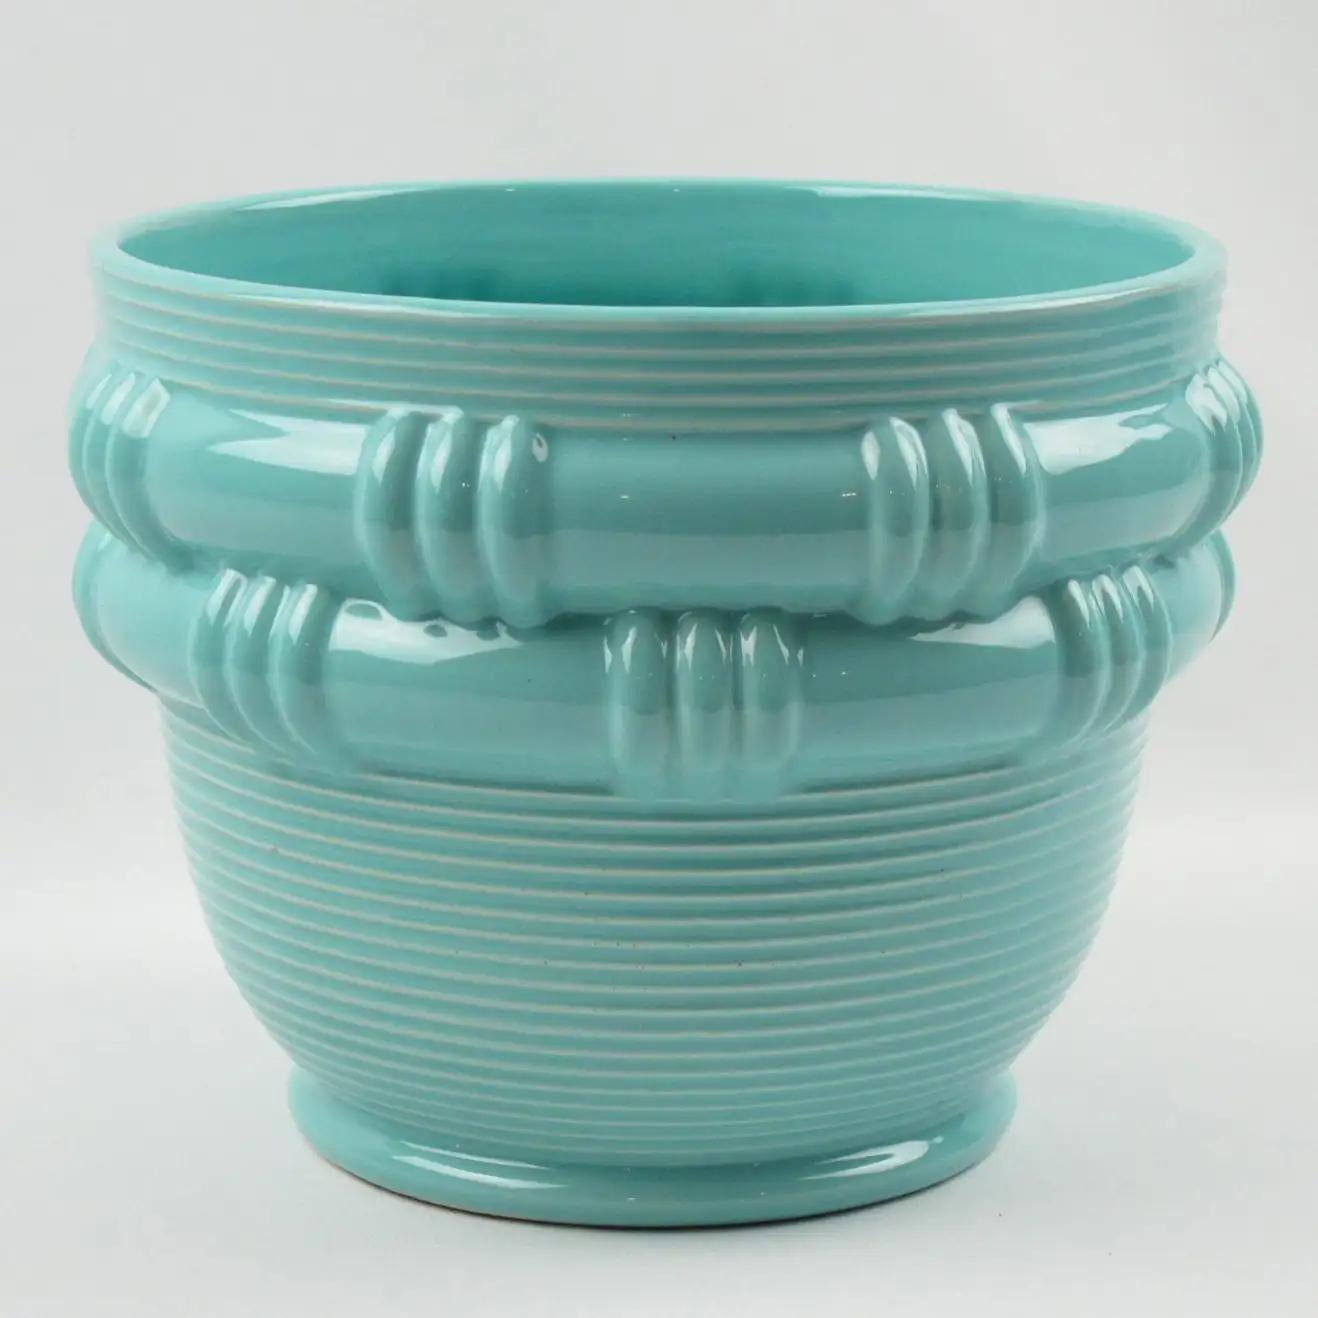 This stylish 1950s ceramic vase or planter was hand-crafted by ceramicist Blanche Letalle for Faiencerie Saint-Clement, France. The piece boasts a lovely turquoise glaze with a basketry pattern. Blanche Letalle was a recognized French